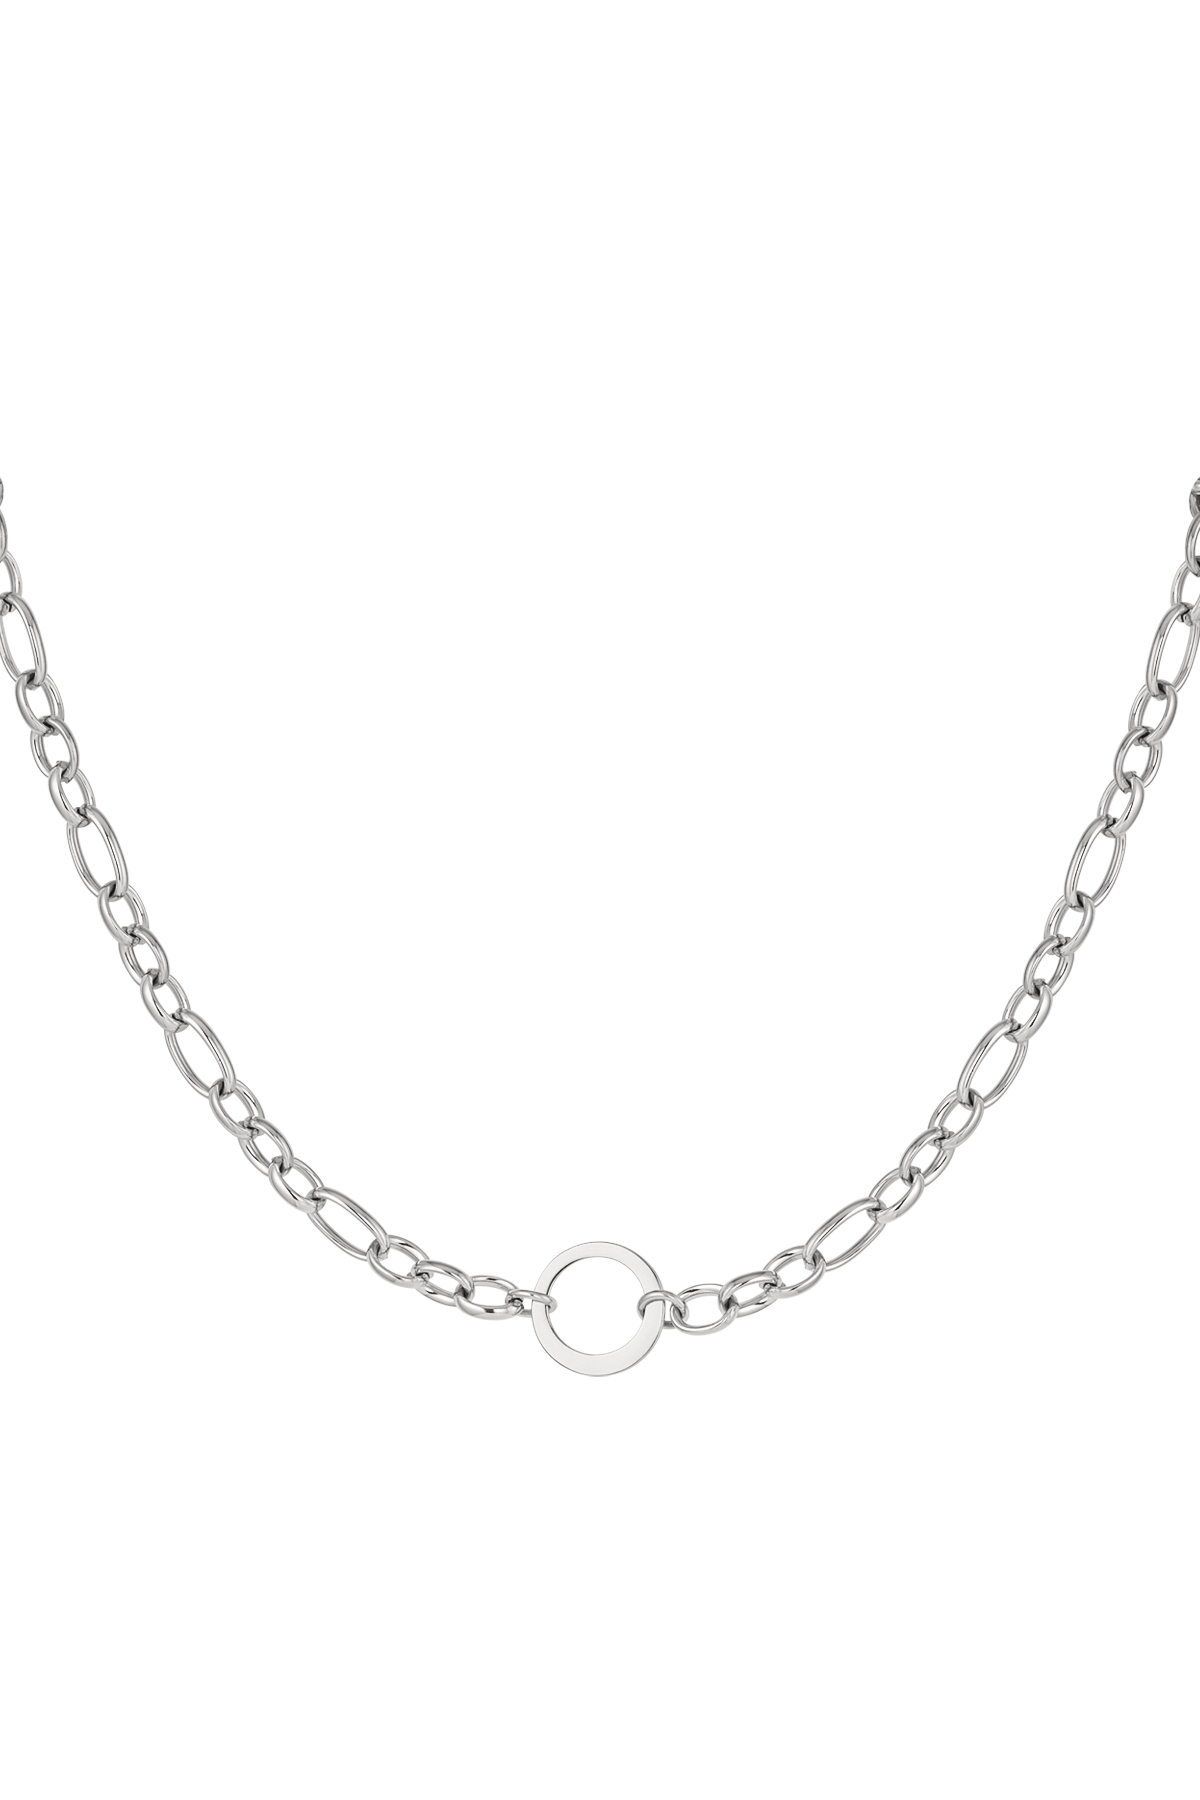 Link chain round - silver Stainless Steel h5 